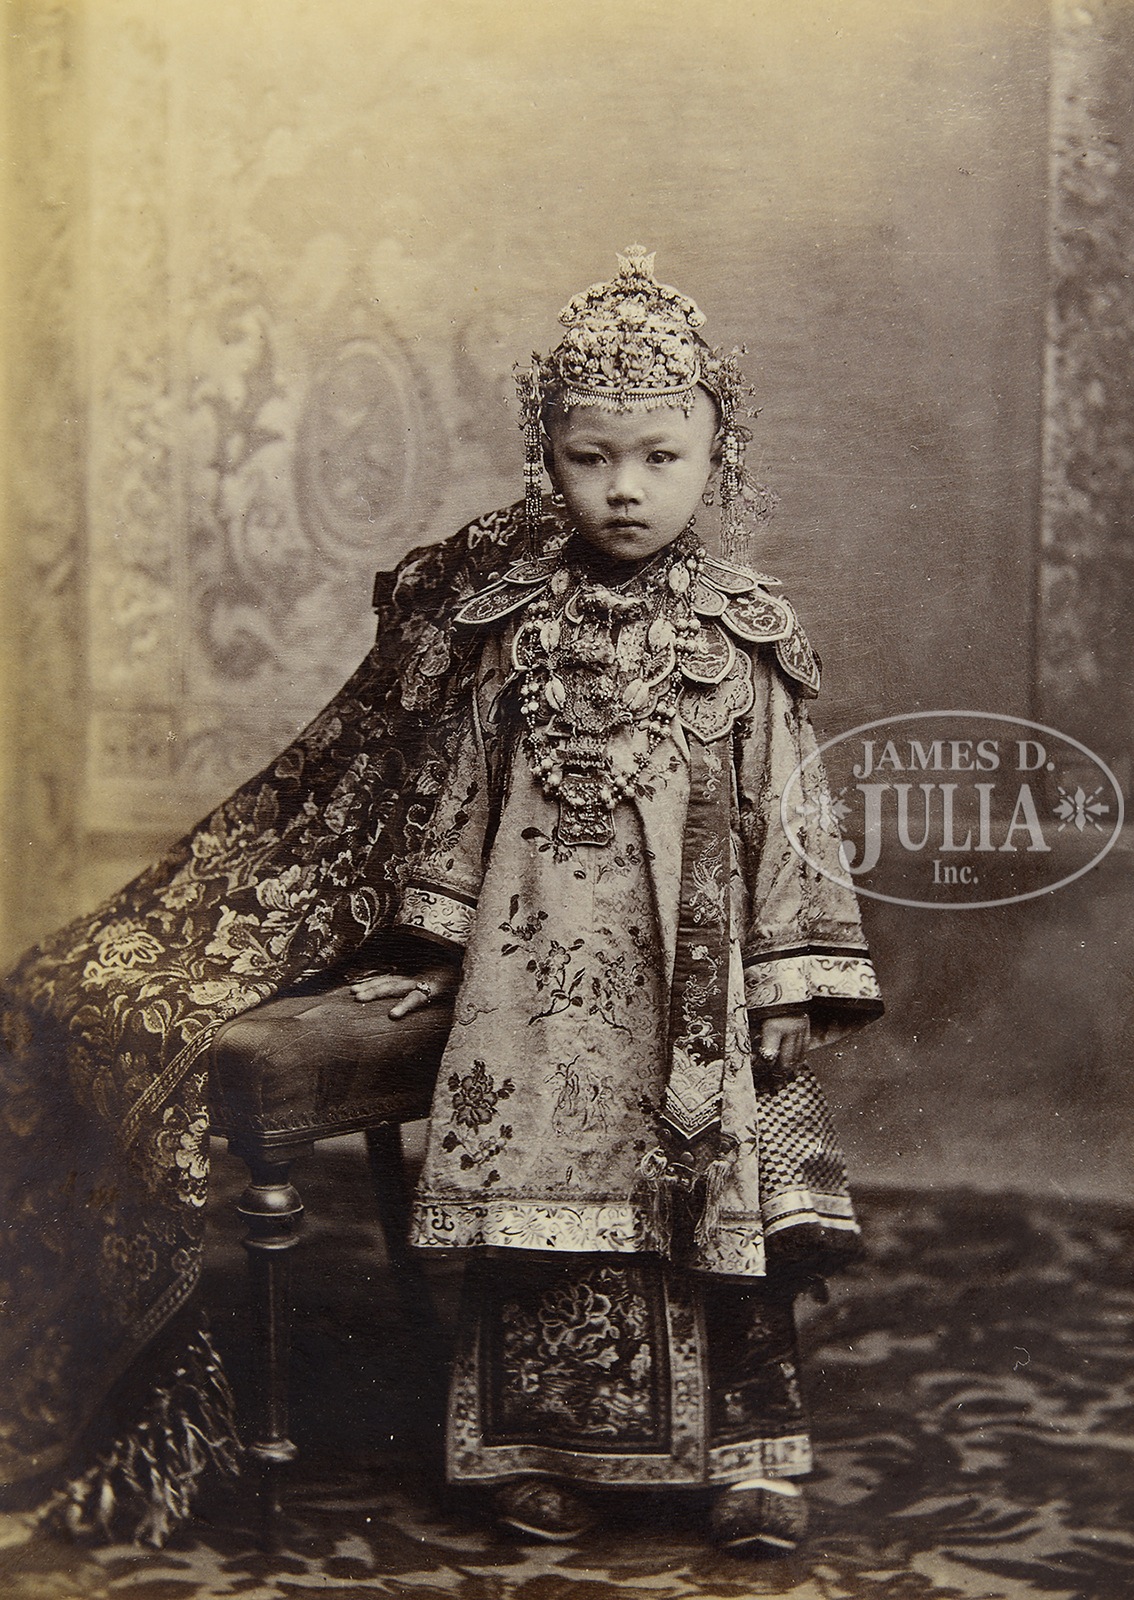 EXTRAORDINARY & MASSIVE LIFE LONG COLLECTION OF RARE ASIAN PHOTOGRAPHS AMASSED BY DR. HELGA WALL- - Image 164 of 222